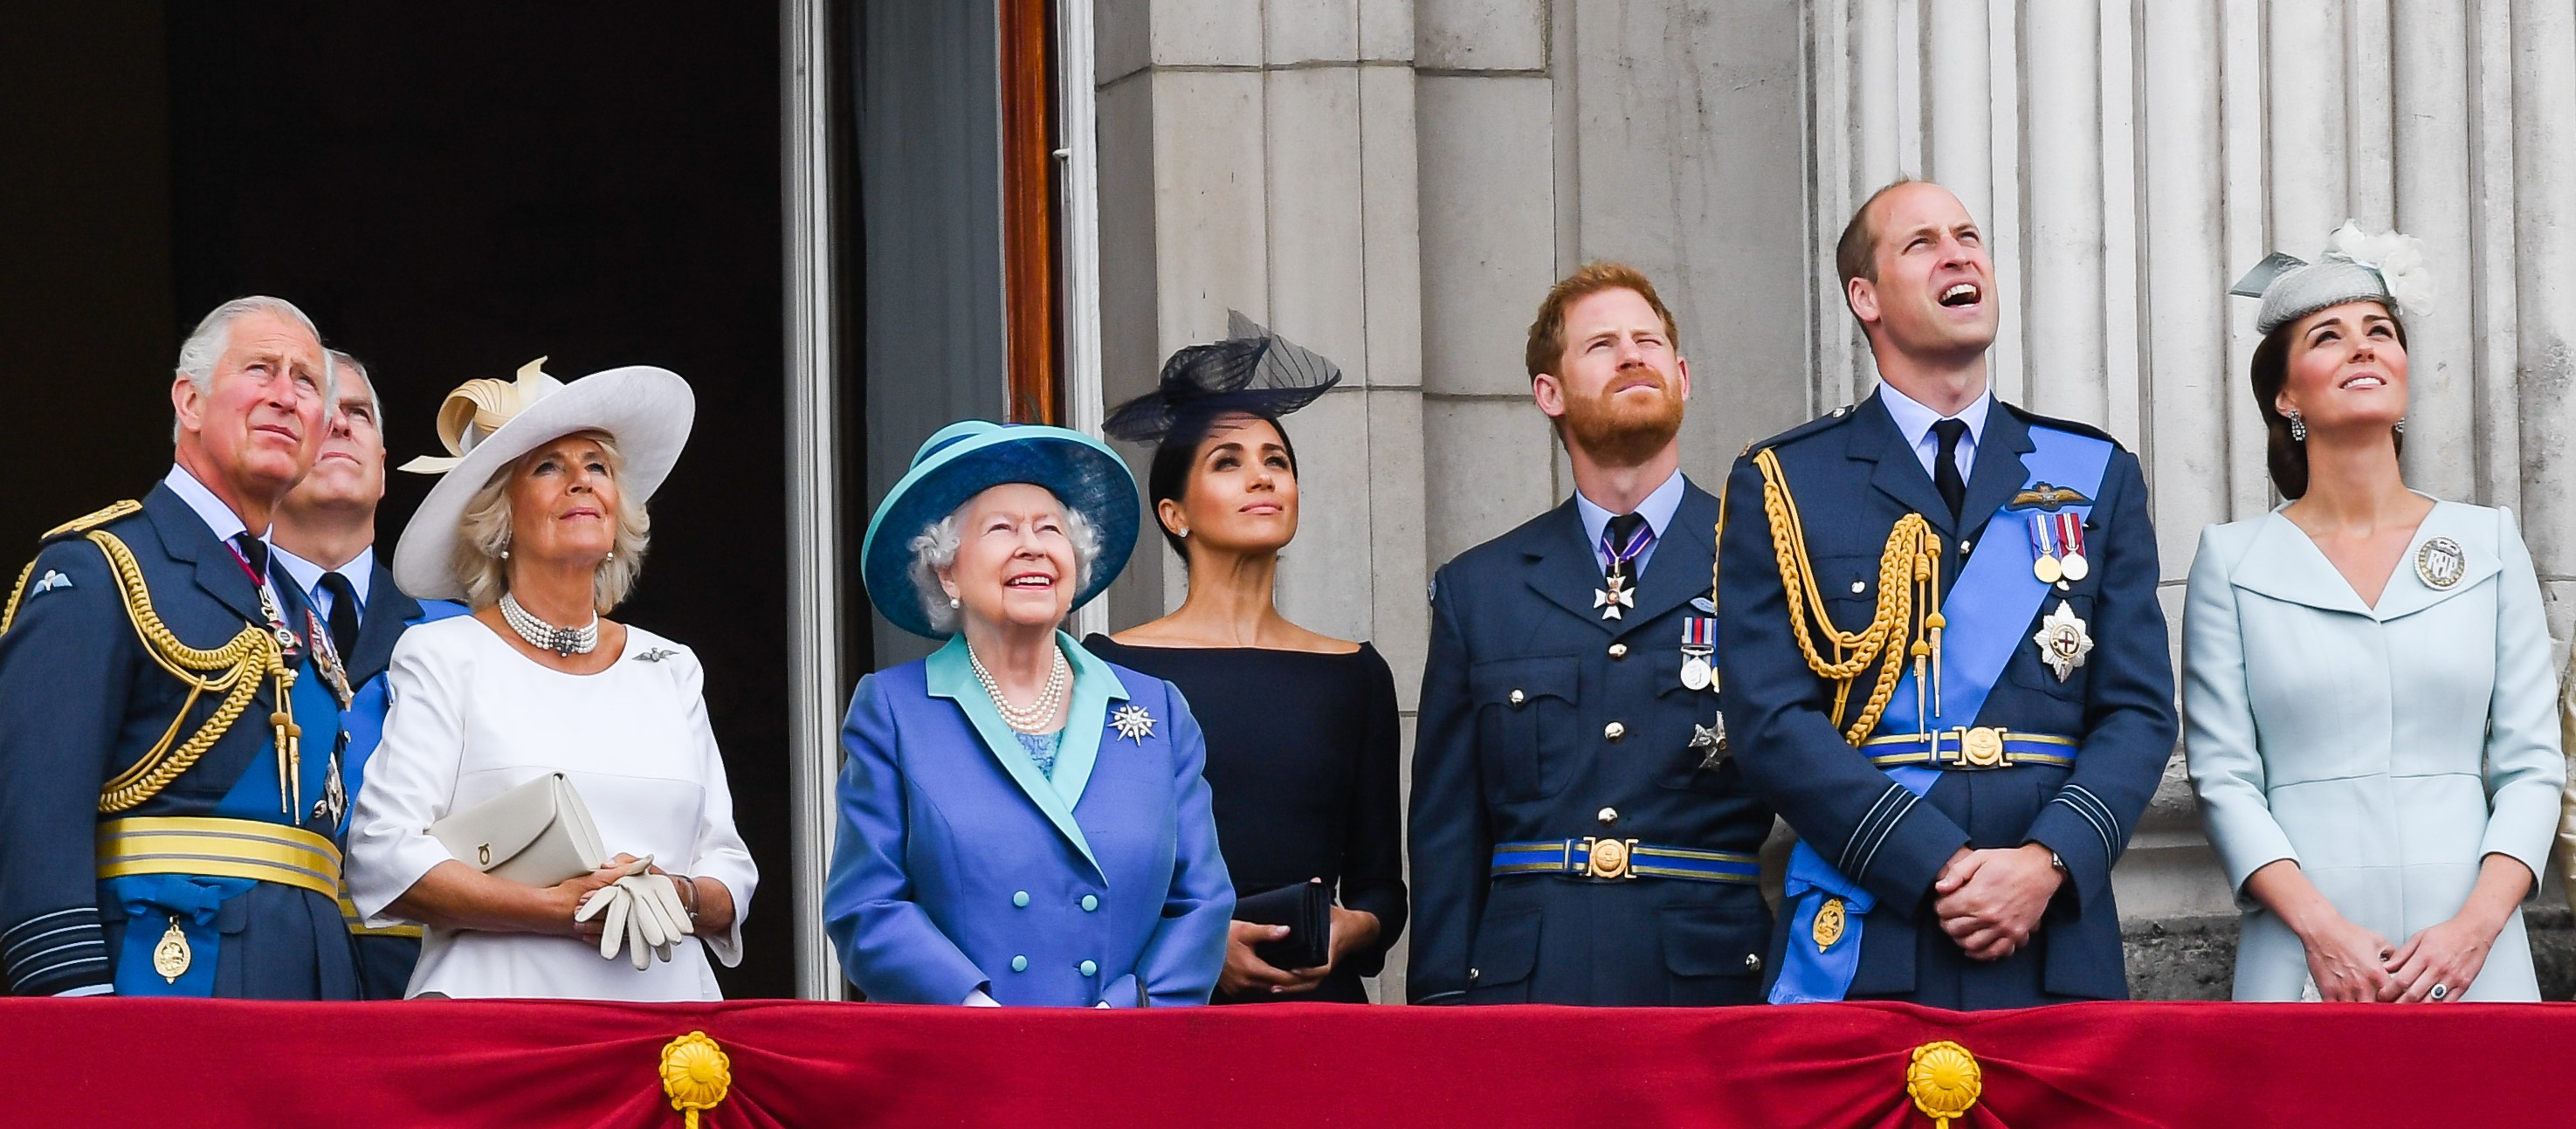 Prince Charles, Camilla Parker Bowles, Prince Andrew, Queen Elizabeth ll, Meghan Markle, Prince Harry, Prince William, and Kate Middleton